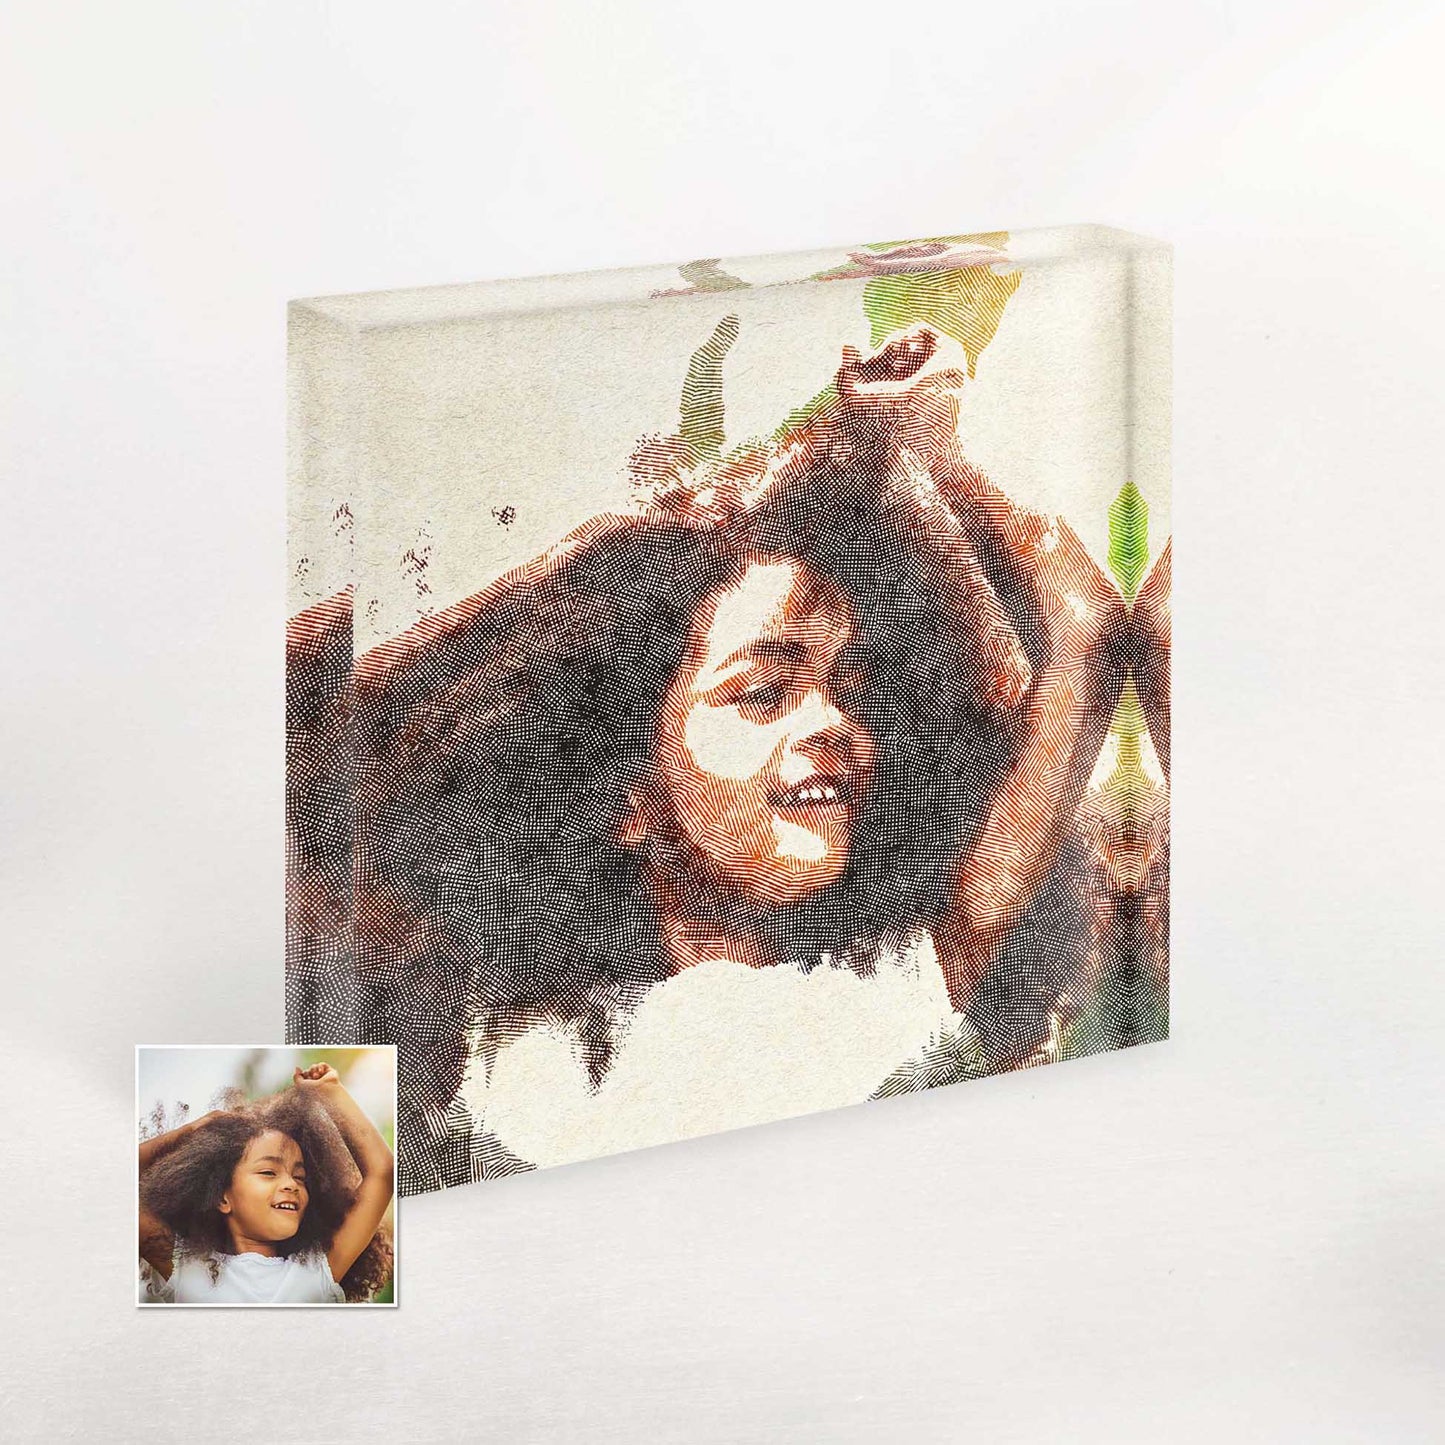 Elevate your home decor with our Personalised Crosshatch Acrylic Block Photo. Its distinctive texture drawing, crafted from your photo, adds an exciting and inspirational element, filling your space with a vibrant and bright sense of happiness.